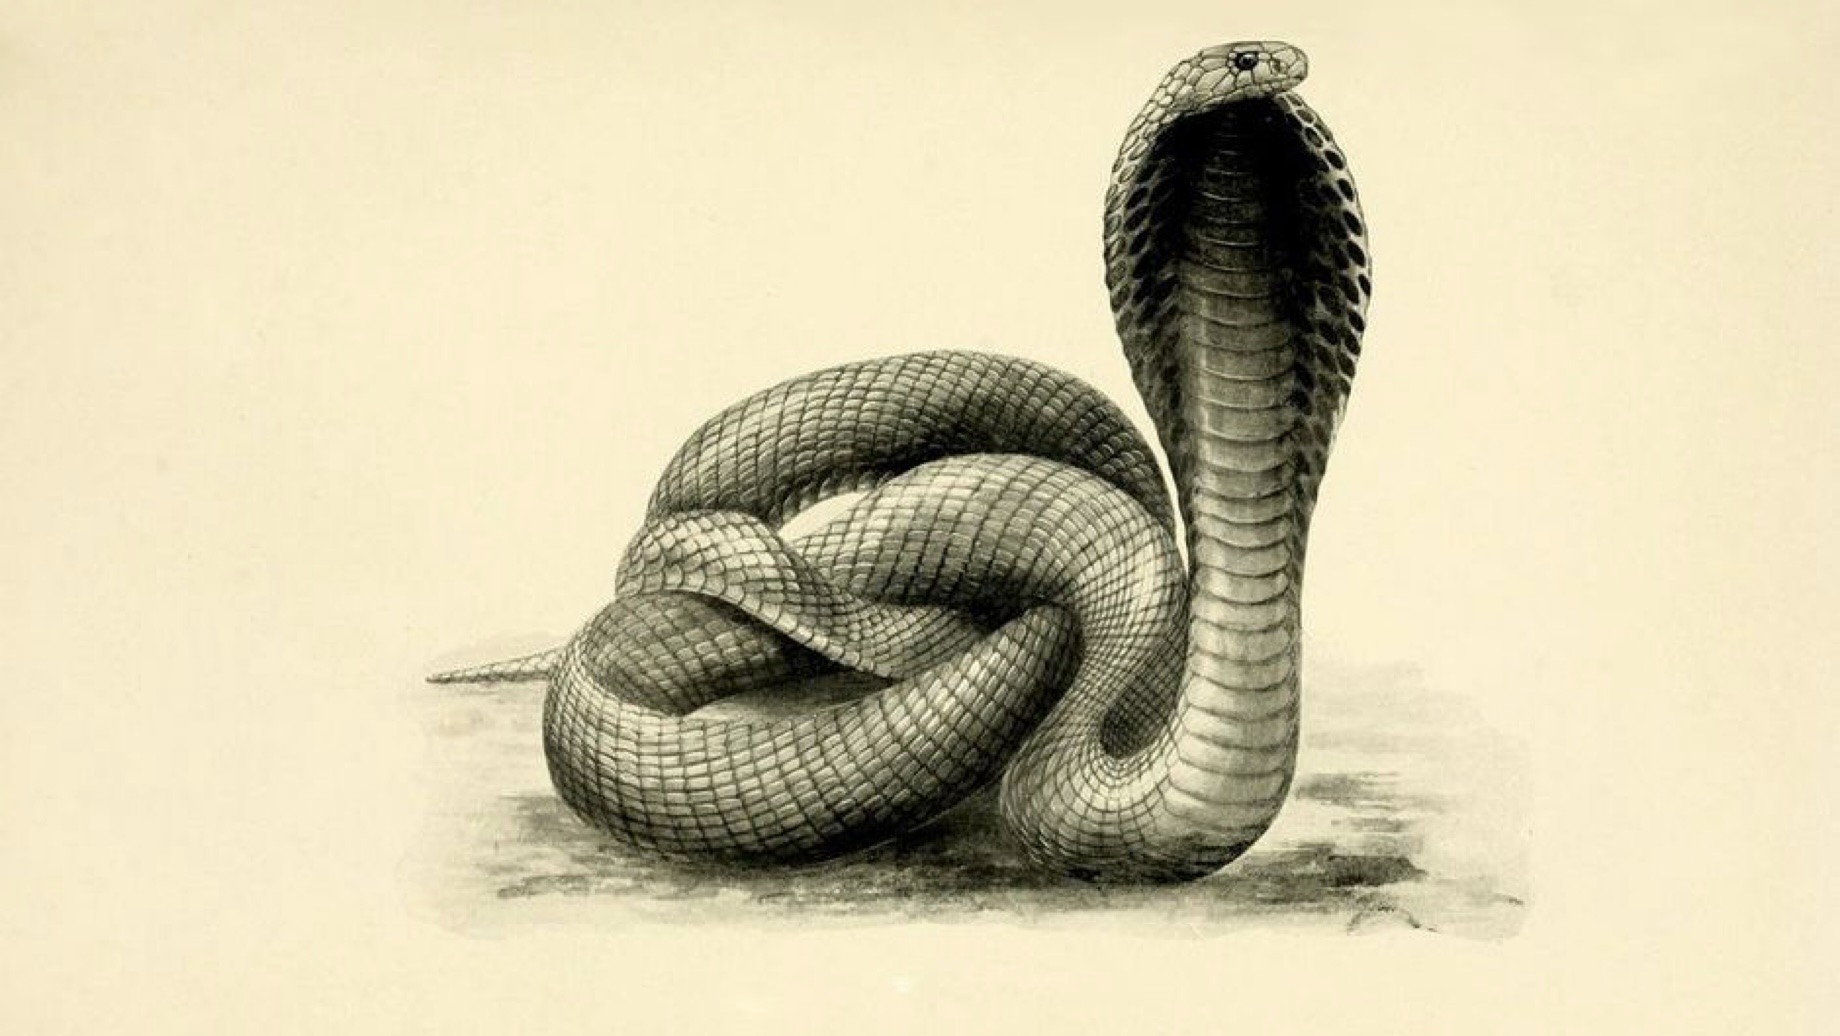 Illustration of a cobra from the _Our World_ article "Systems Thinking
and the Cobra Effect" by Barry Newell and Christopher Doll, published
2015-09-16.